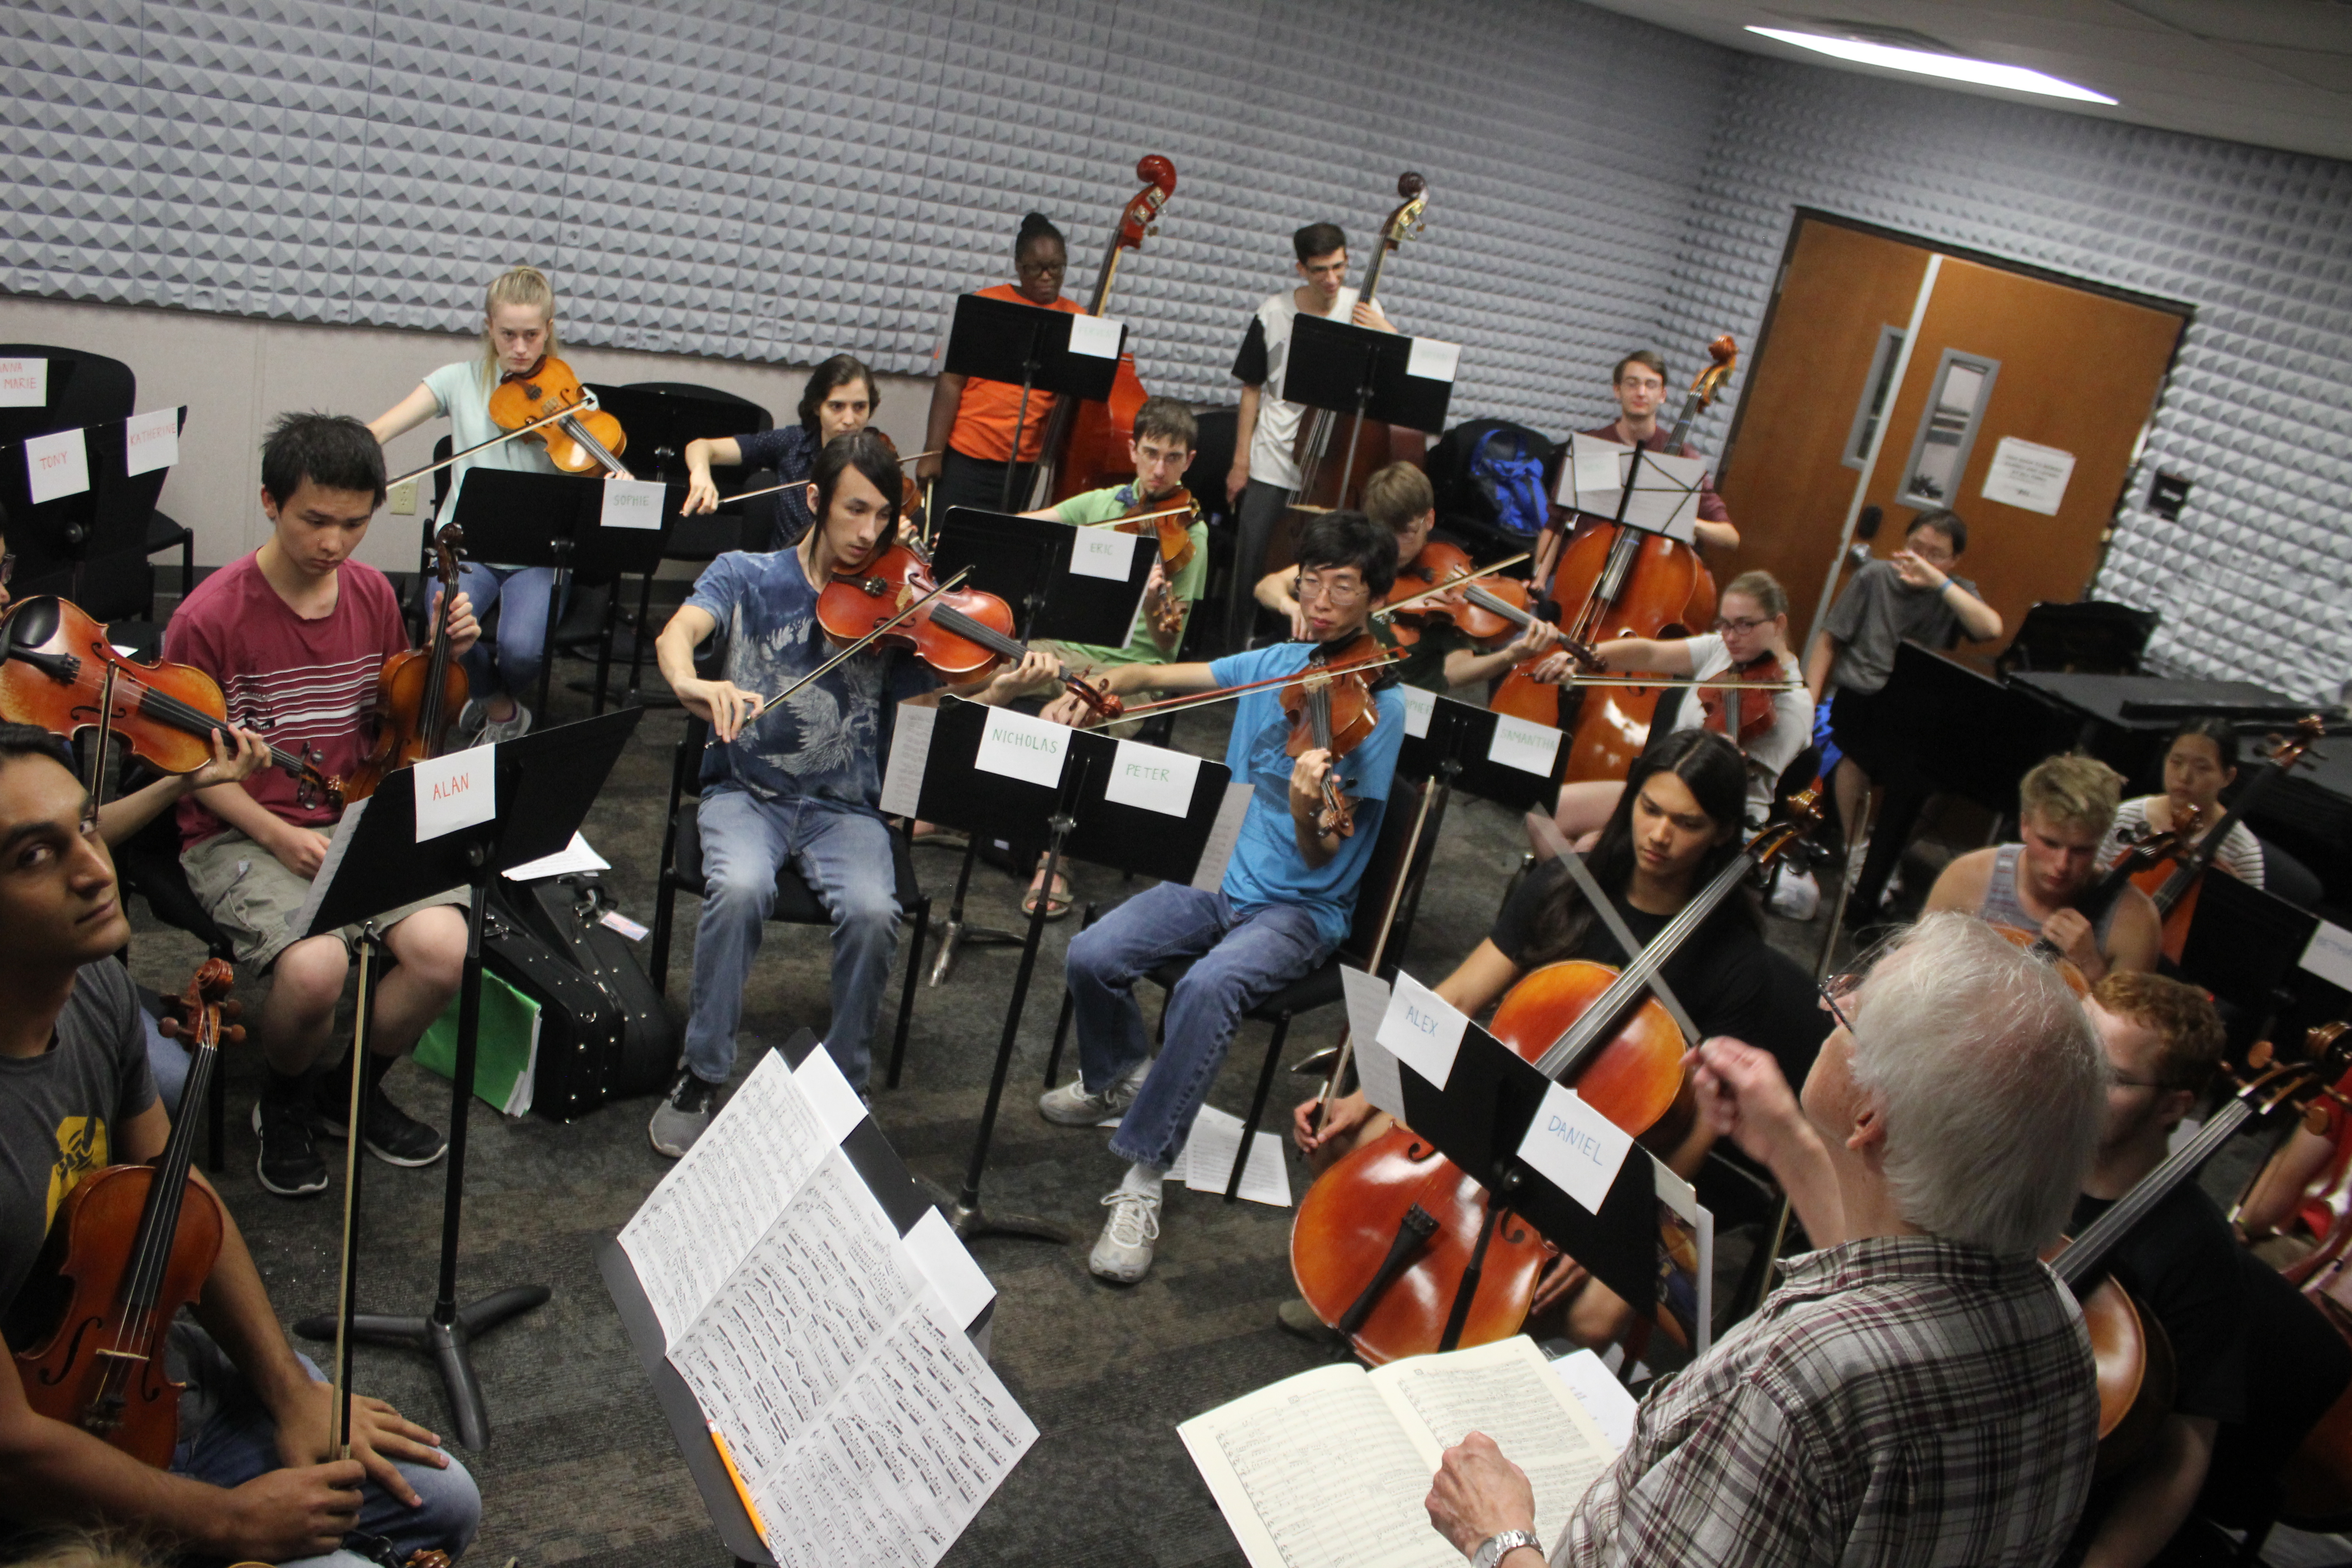 Ensembles grapple with space shortage